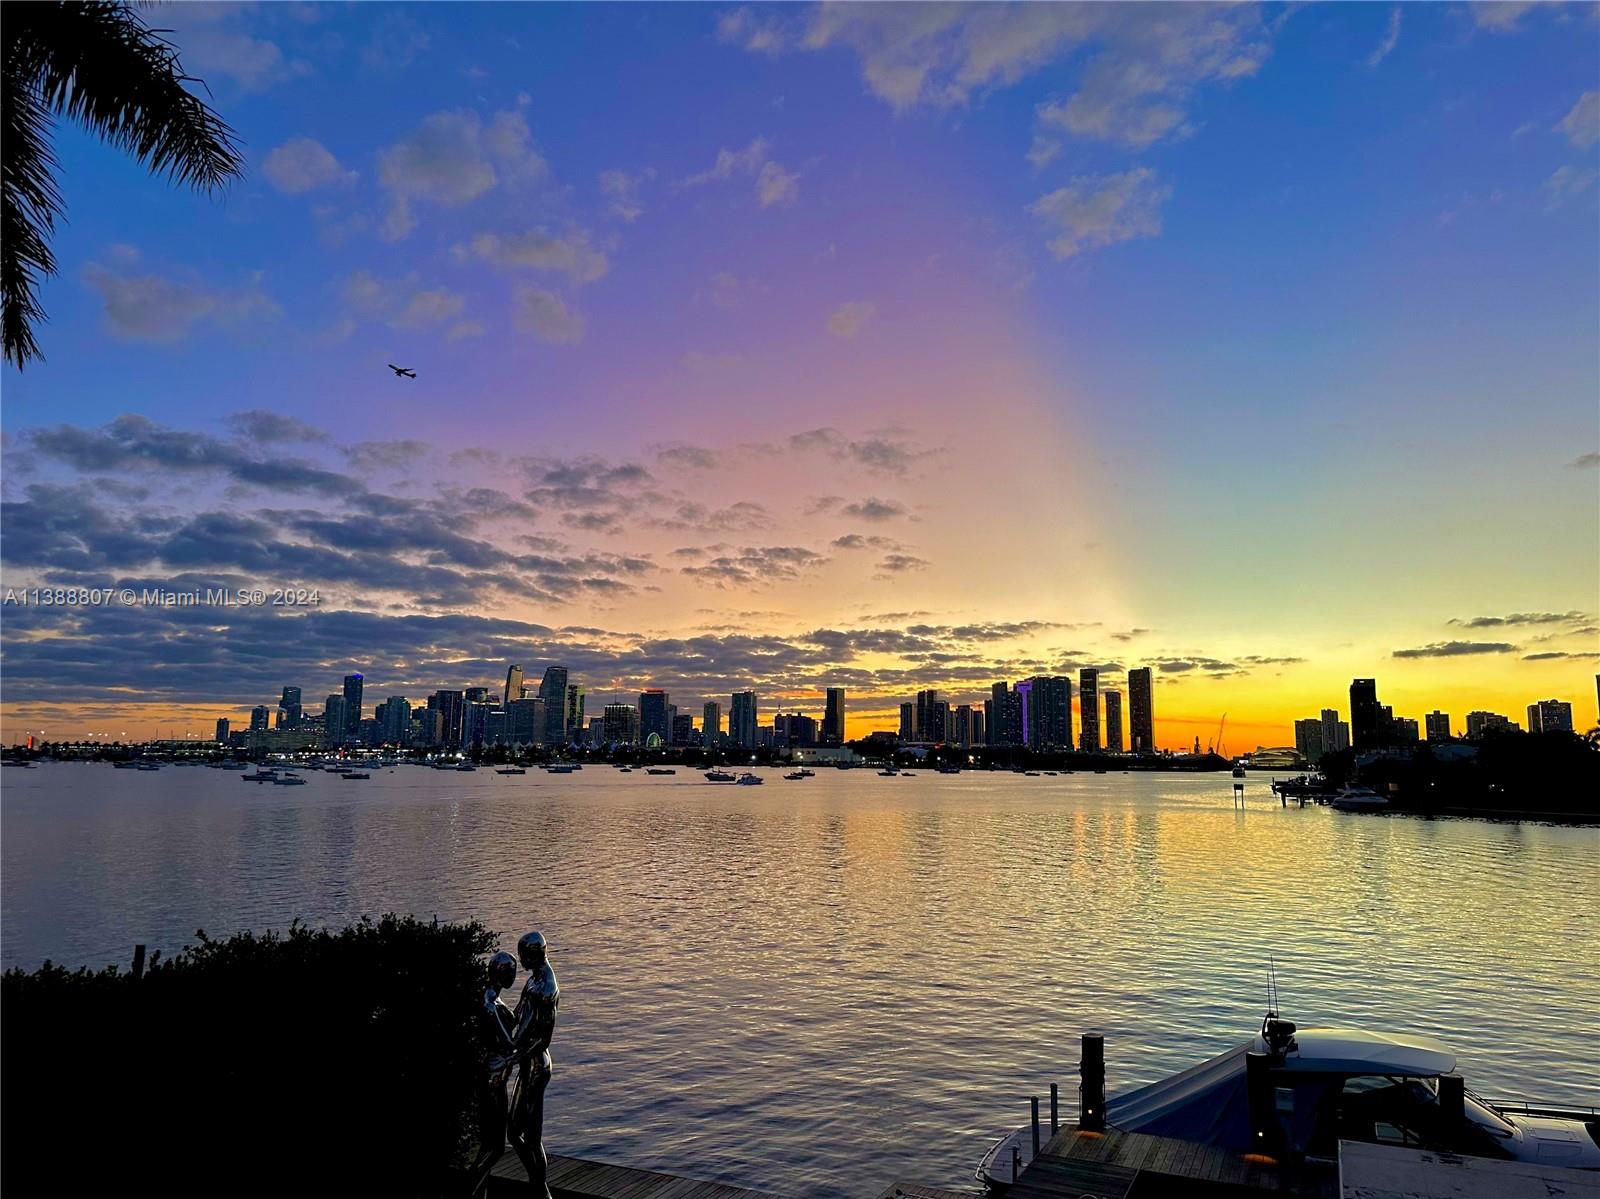 THE ULTIMATE POST CARD VIEW OF DOWNTOWN MIAMI SKYLINE ON THE BAY…THIS TROPICAL MODERN WATERFRONT ESTATE SITS ON THE BEST LOCATION OF SAN MARINO ISLAND! Stunning Two-Story Waterfront Residence w/ 9,005 Adj Gross SF on a LOT & A HALF at 15,750 SF with 90 FT of Waterfront. 5 Bedrooms + 5 Baths + 2 Powder Rooms + Media Room + Office + Family Room. Open Floorplan with 10 FT Telescopic Doors by Fleetwood providing Seamless Indoor/Outdoor Living. Blonde Oak Chef’s Eat-in Kitchen with Stainless Steel Miele Appliances, Breakfast Area + Family Room, Library, Wine Cellar & Bar. Spacious Primary Suite draped by Panoramic Sunsets & Views of Miami Skyline. Deep wraparound Balcony & Stairs Lead to Expansive Rooftop Entertaining Area. Tropical Pool & Spa with Modern Gazebo + Summer Kitchen + Cabana Bath.